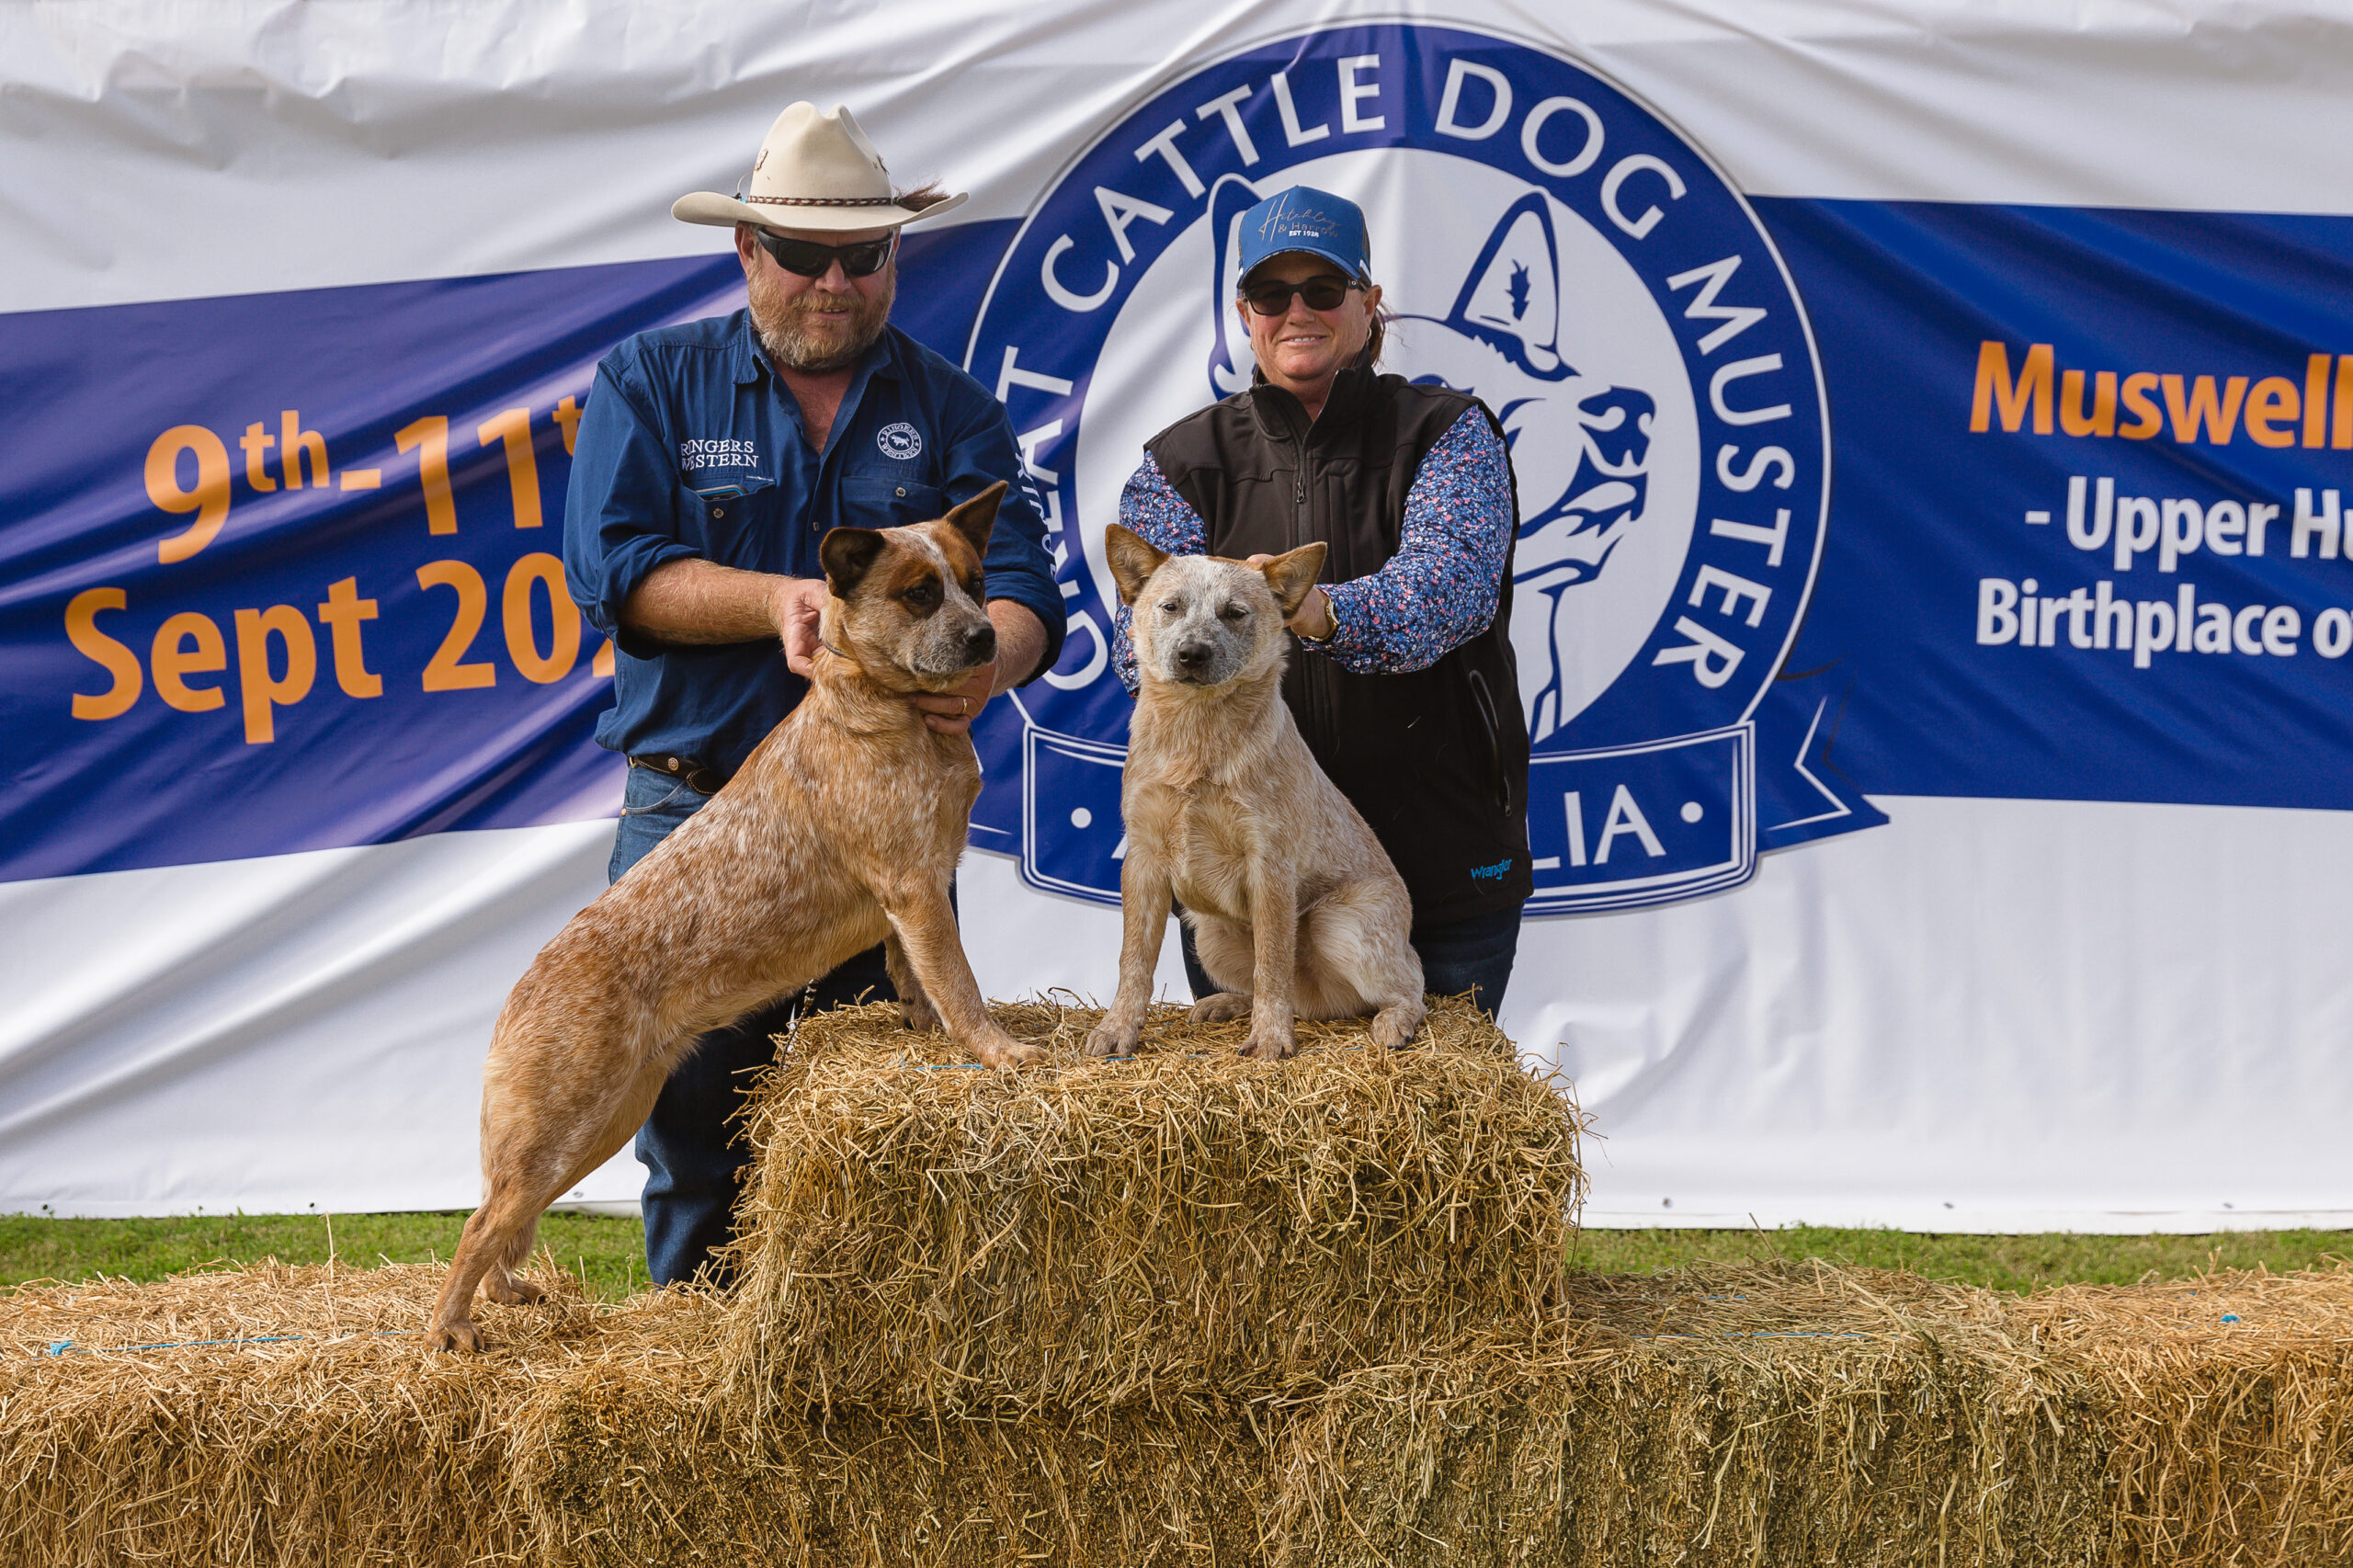 Community Family Fun Day • The Great Cattle Dog Muster • Muswellbrook